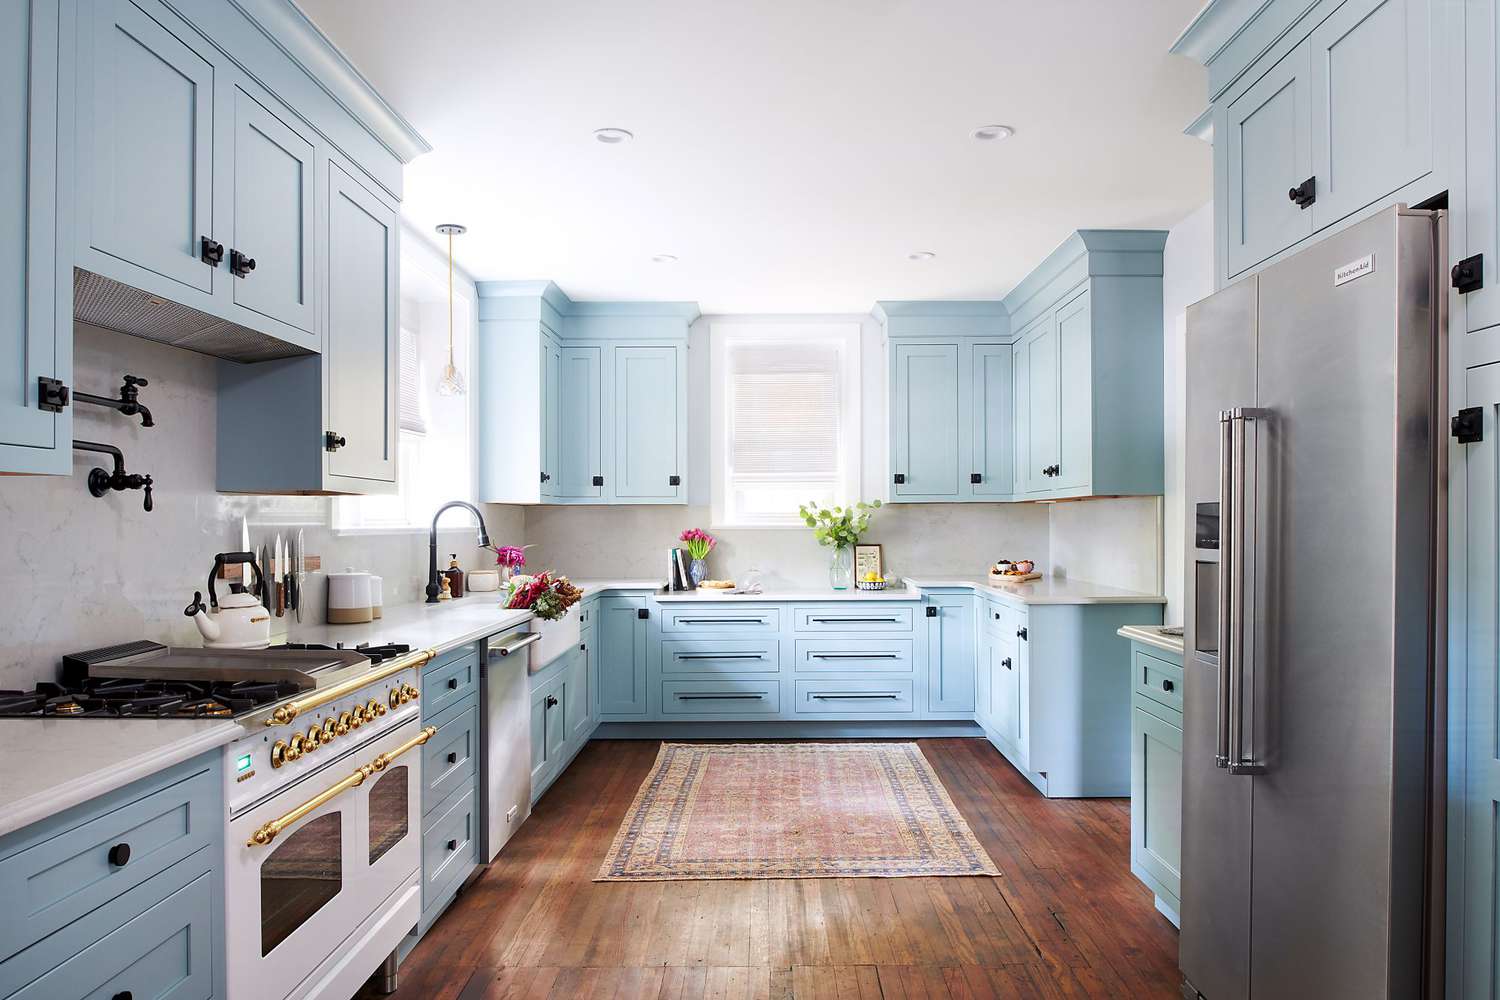 How To Pick Kitchen Paint Colors, How To Pick Colors For Kitchen Cabinets